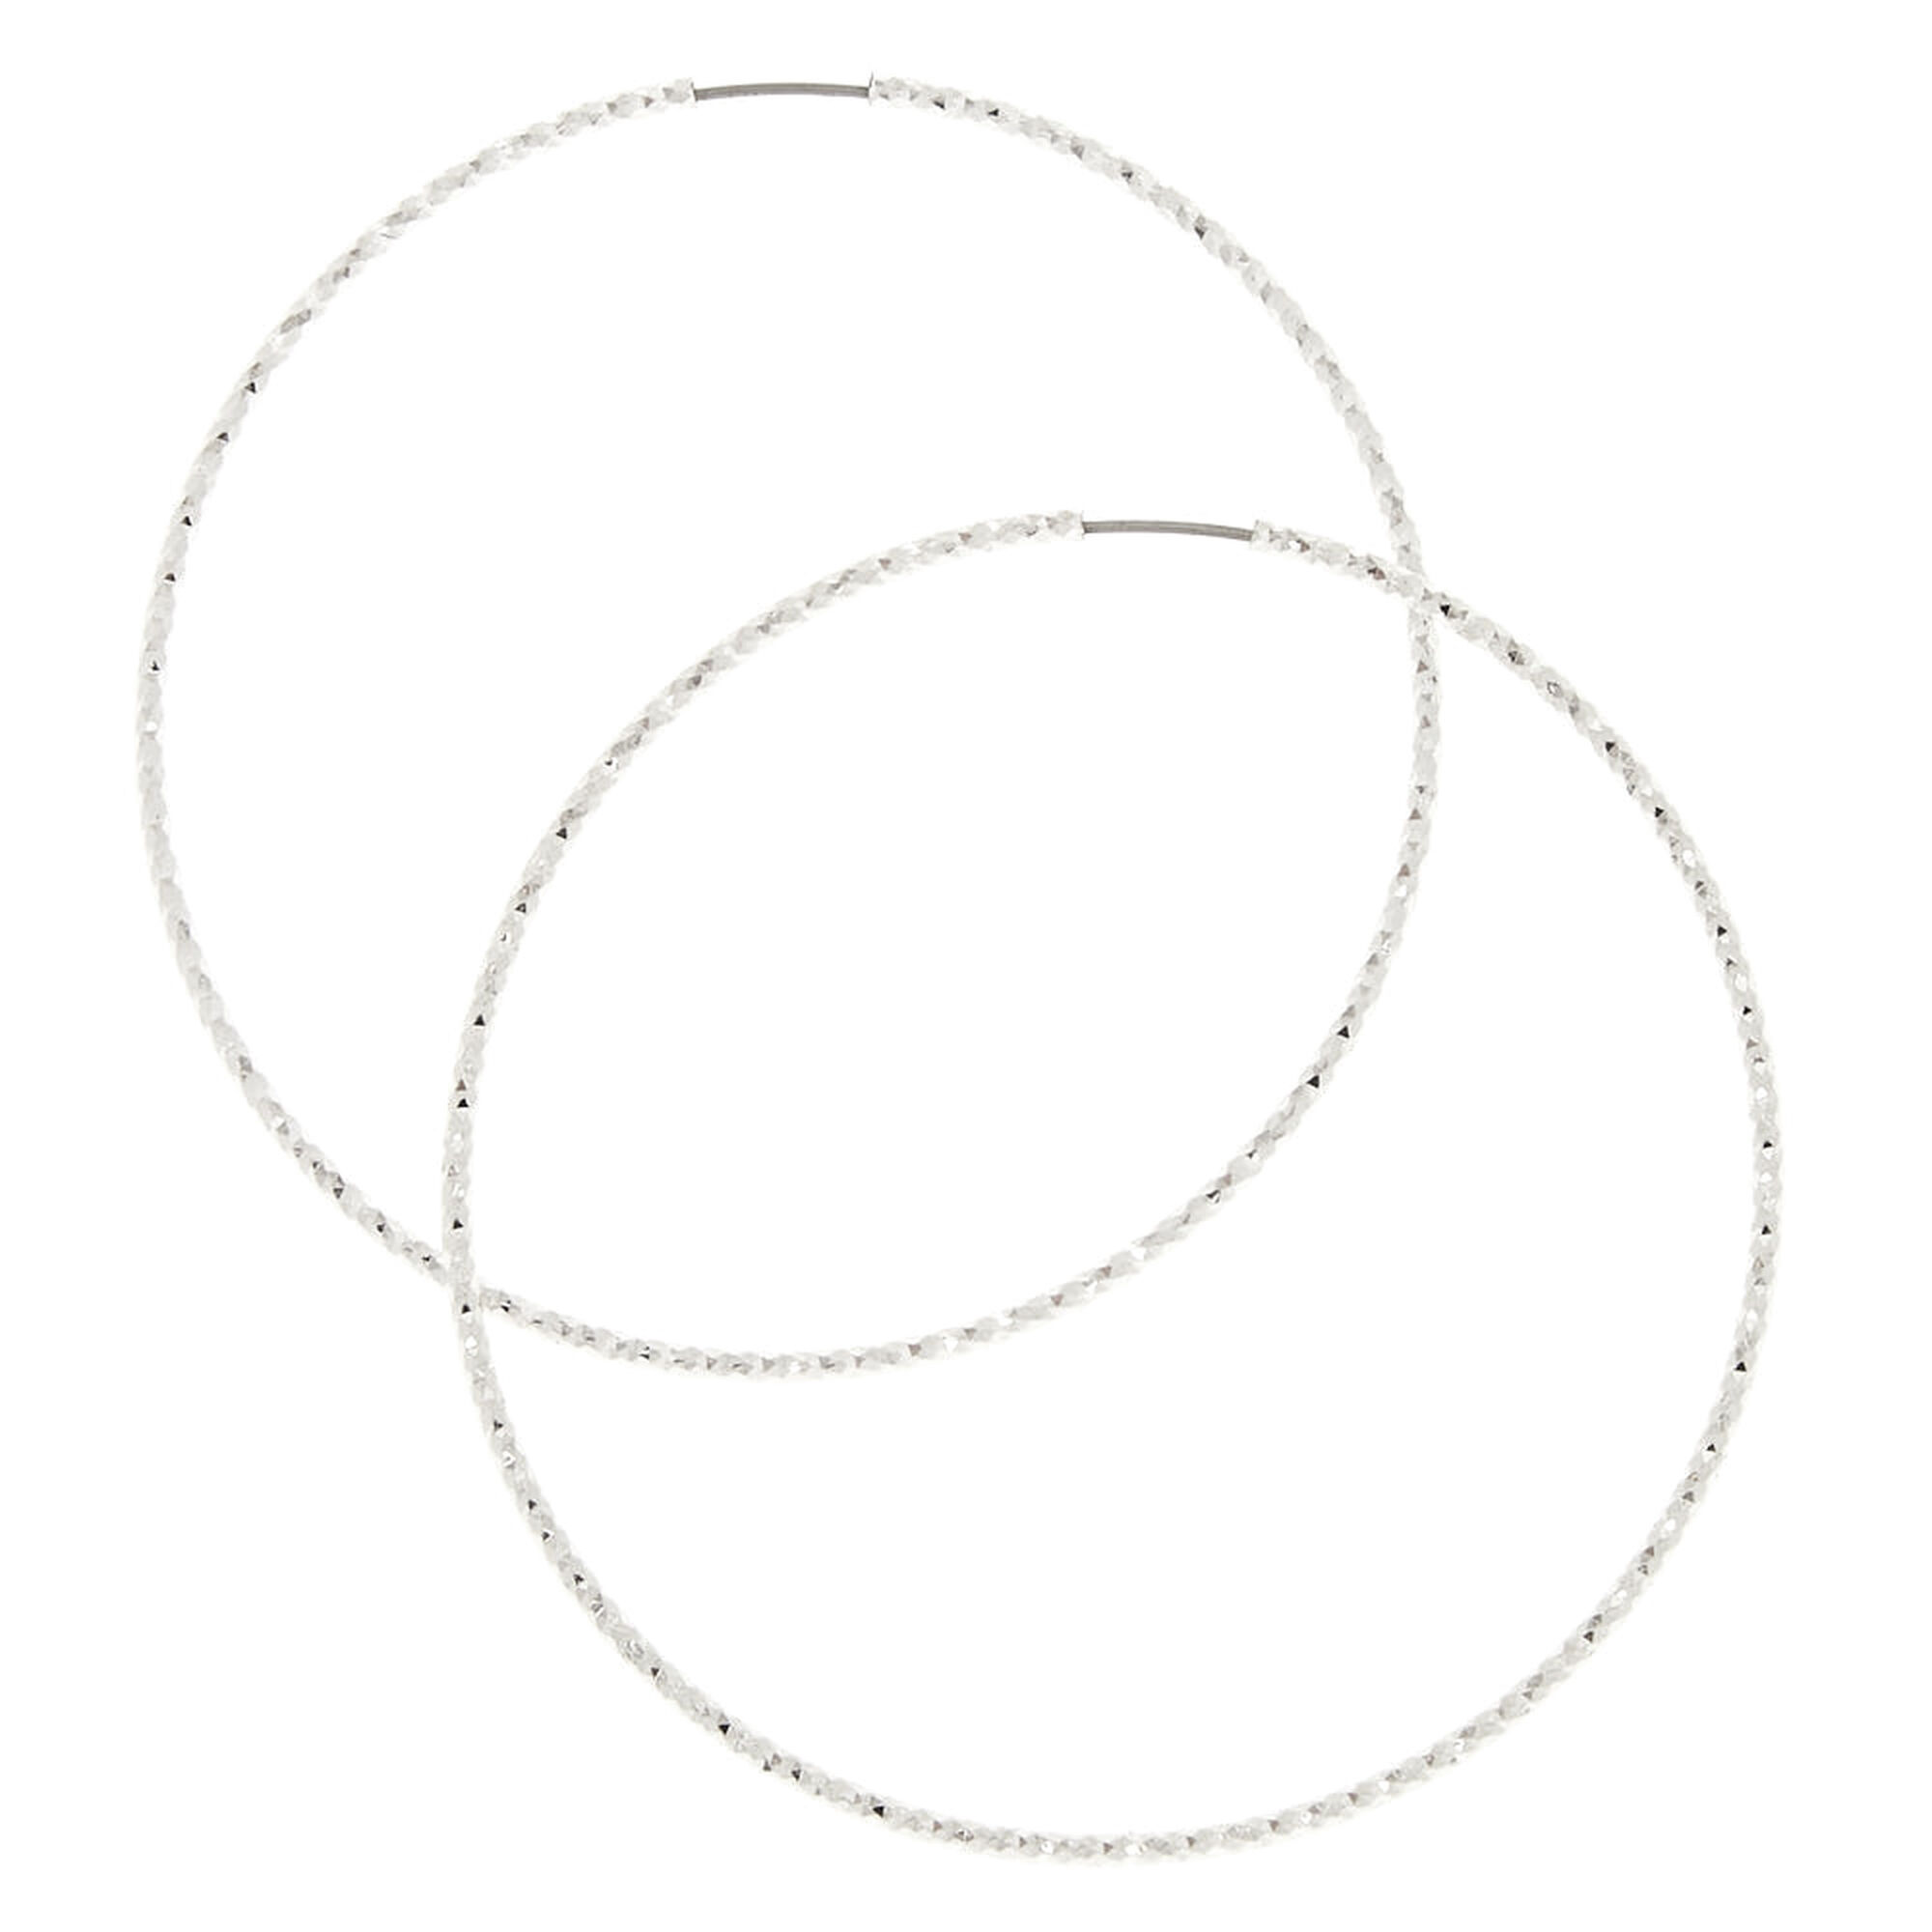 View Claires Tone 60MM Laser Cut Hoop Earrings Silver information